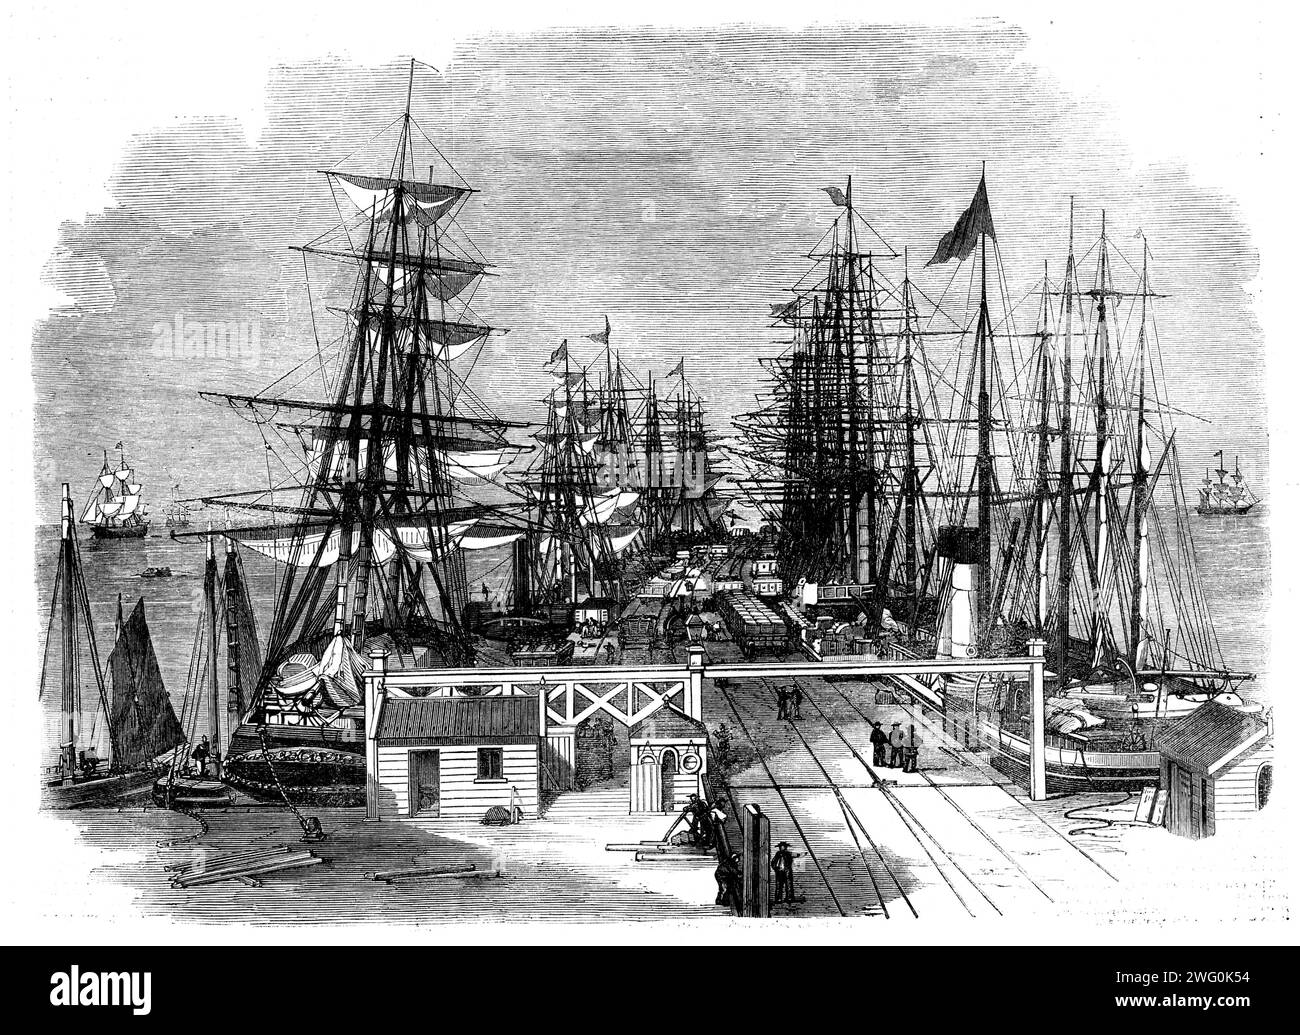 The Melbourne and Hobson's Bay Railway Company's pier at Sandridge, near Melbourne, Australia, 1862. In 1853-4, '... the cost of transit, by lighters from the shipping in the bay, via the circuitous route of the River Yarra Yarra, to the wharves in Melbourne averaged from 45s. to 35s. per ton, but, on the opening of this railway pier for traffic, these rates were reduced to one-seventh...It is constructed of the best colonial hardwood, supported upon blue gum piles...The pier is lighted with gas, and water...is laid on the entire length...From the period of its opening...upwards of half a mill Stock Photo